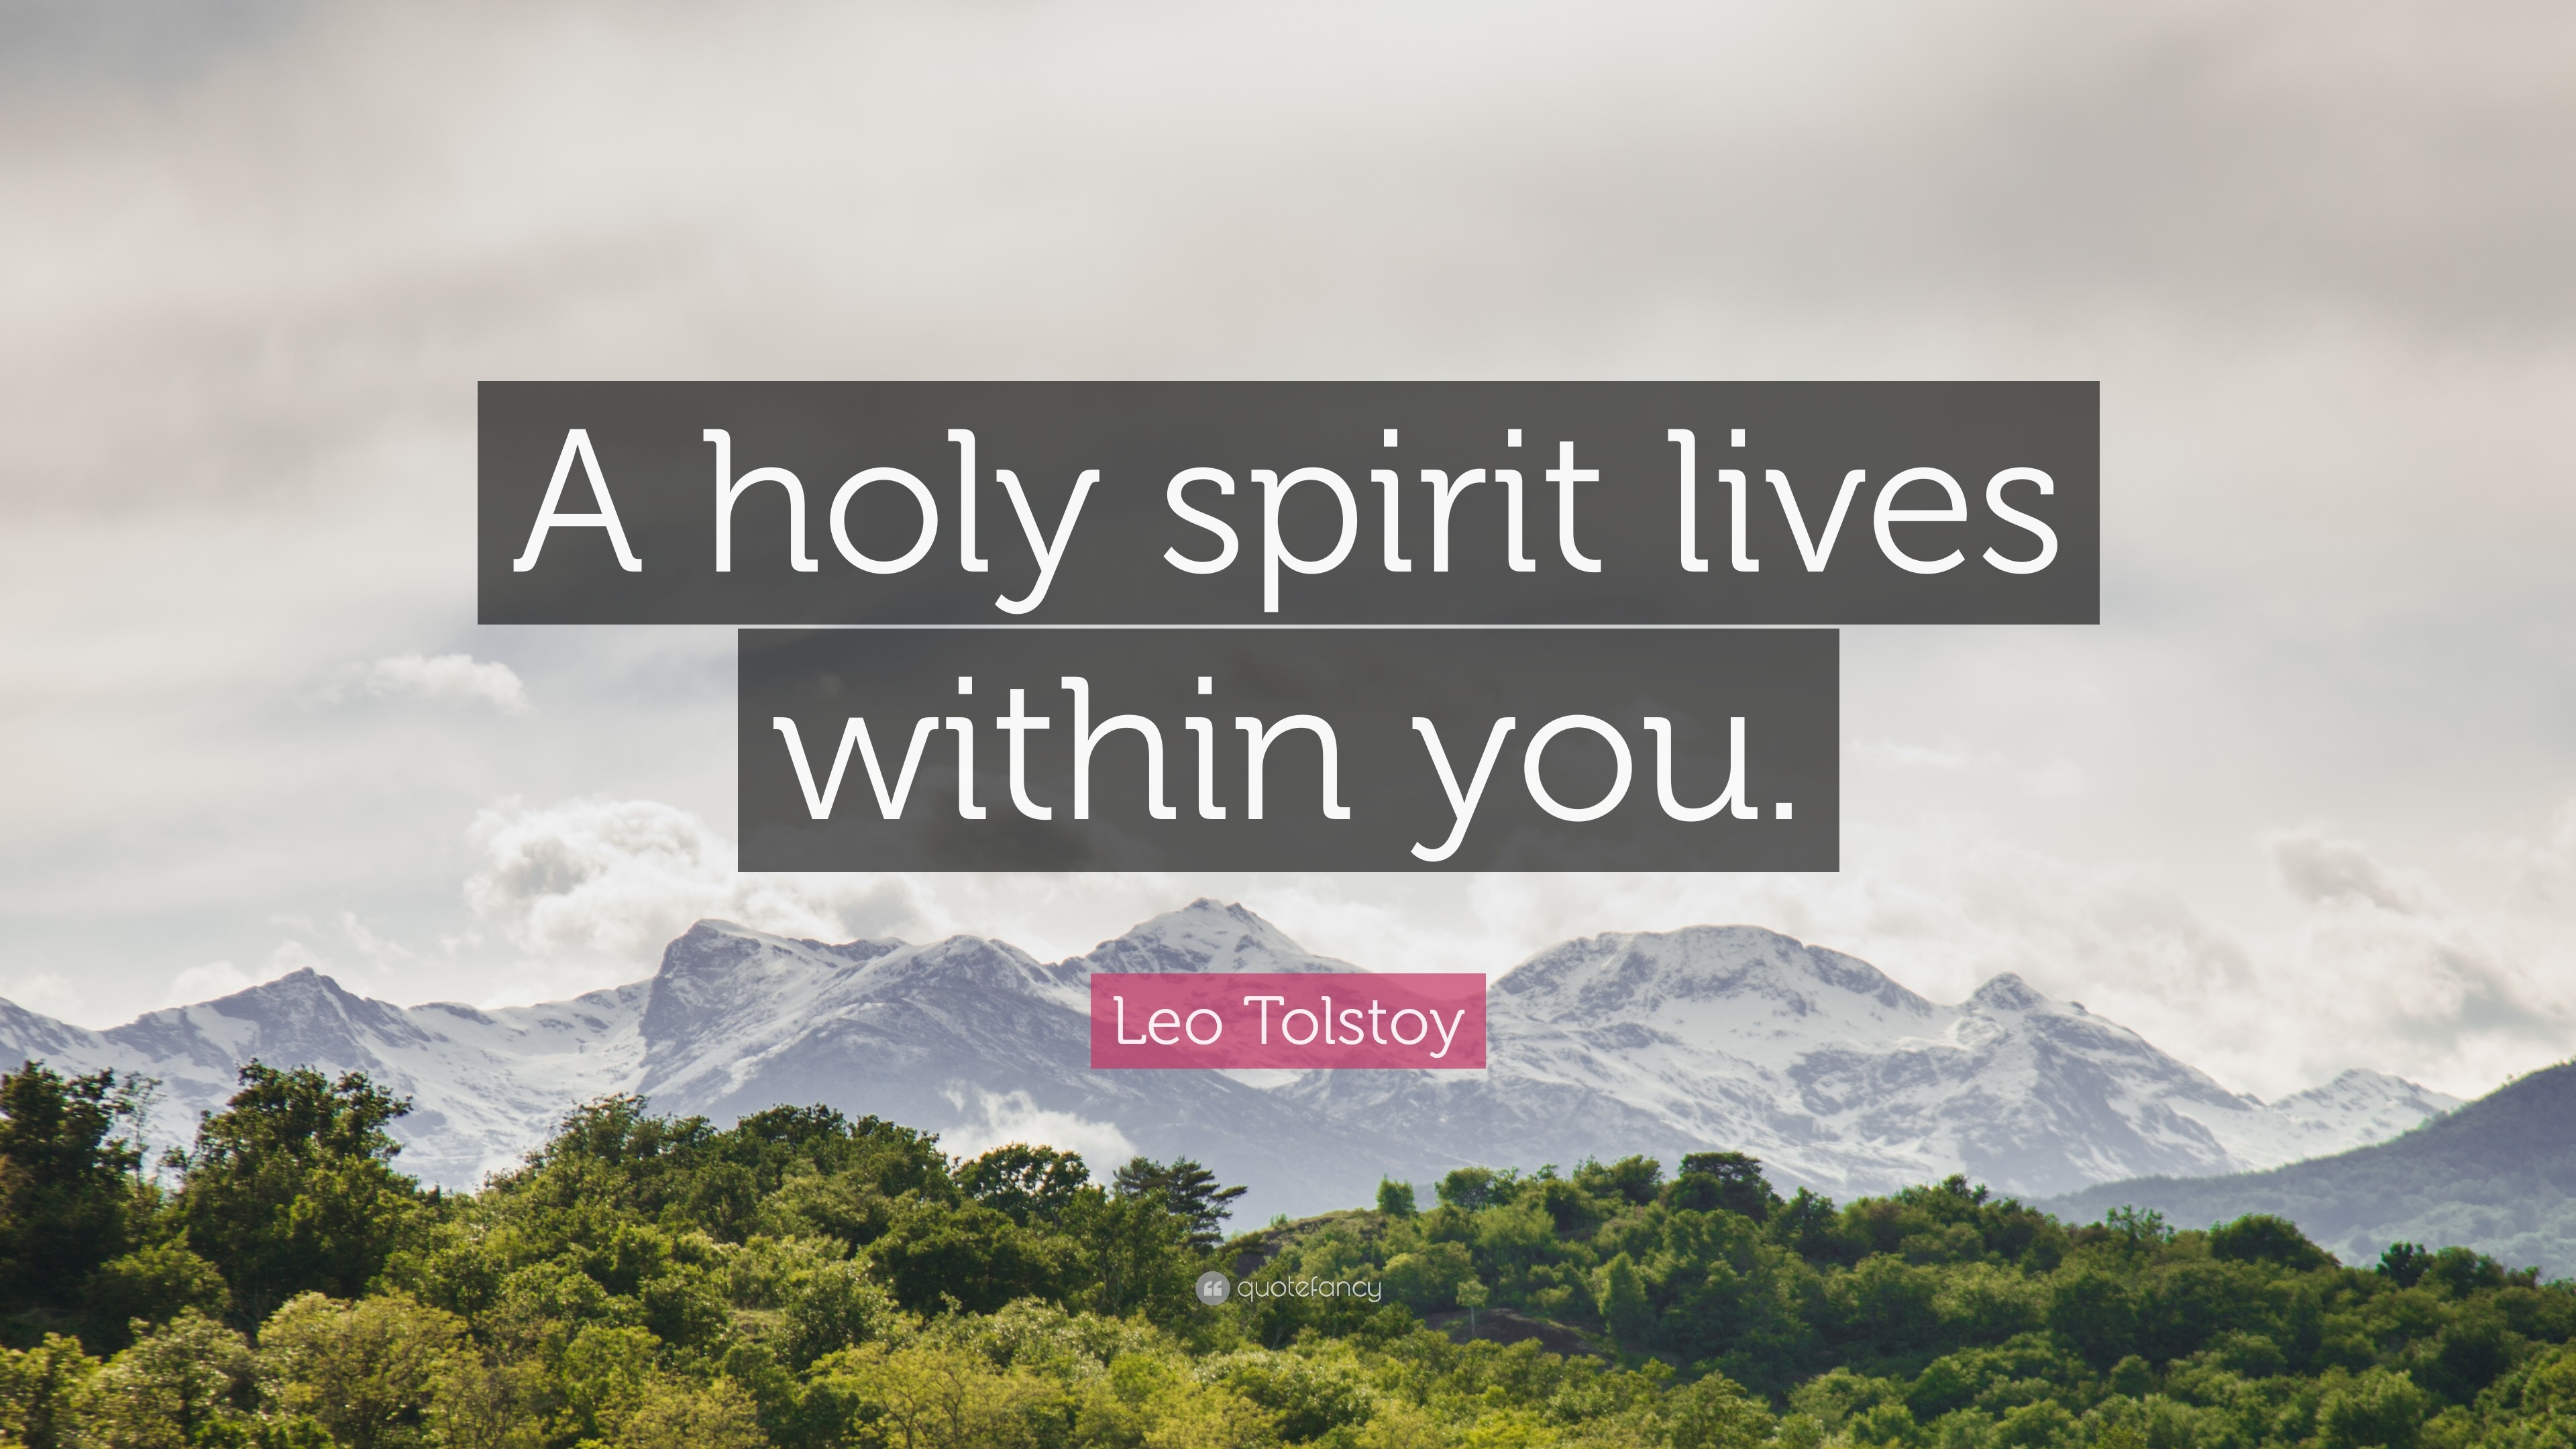 3840x2160 Leo Tolstoy Quote: “A holy spirit lives within you.”